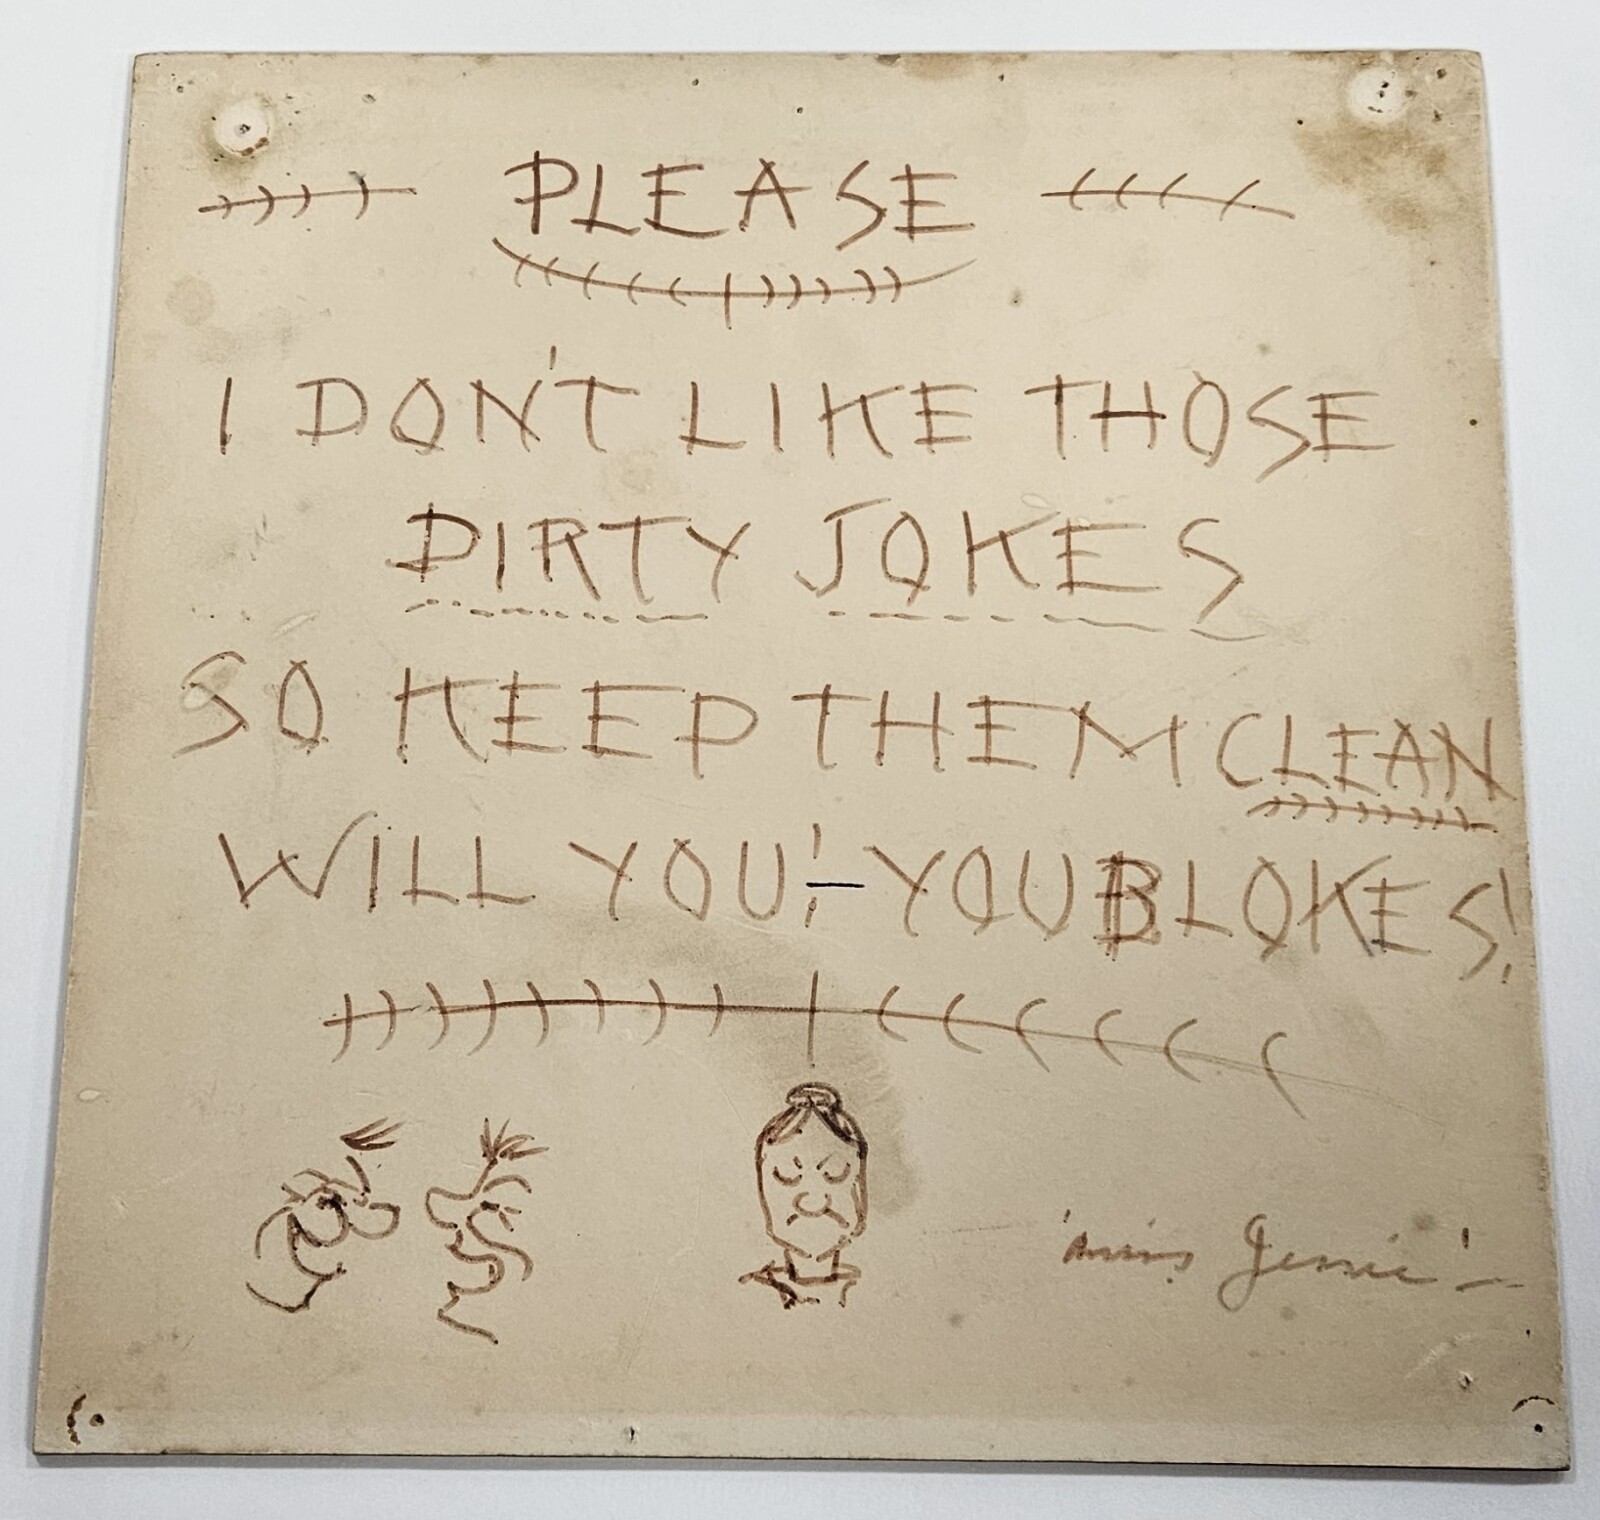 A tile with the following written on it: Please, I don't like those dirty jokes, so keep them clean will you, you blokes!